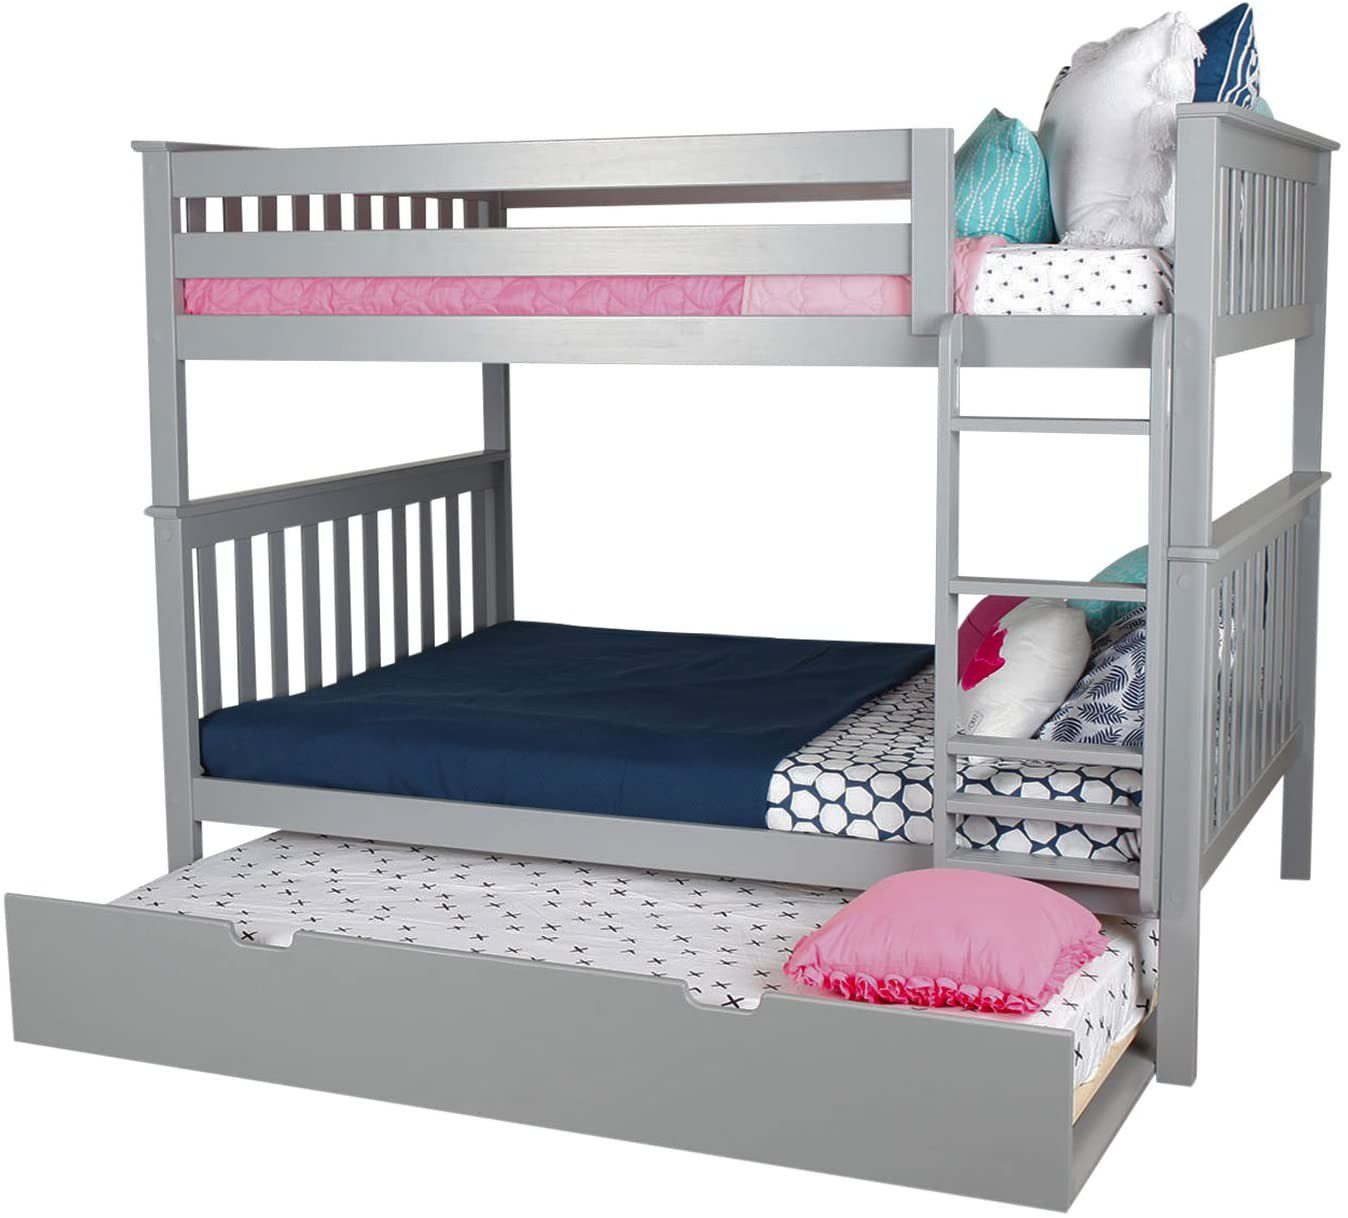 SOLID WOOD TWIN OVER TWIN BUNK BED IN GIRL WITH TRUNDLE BED